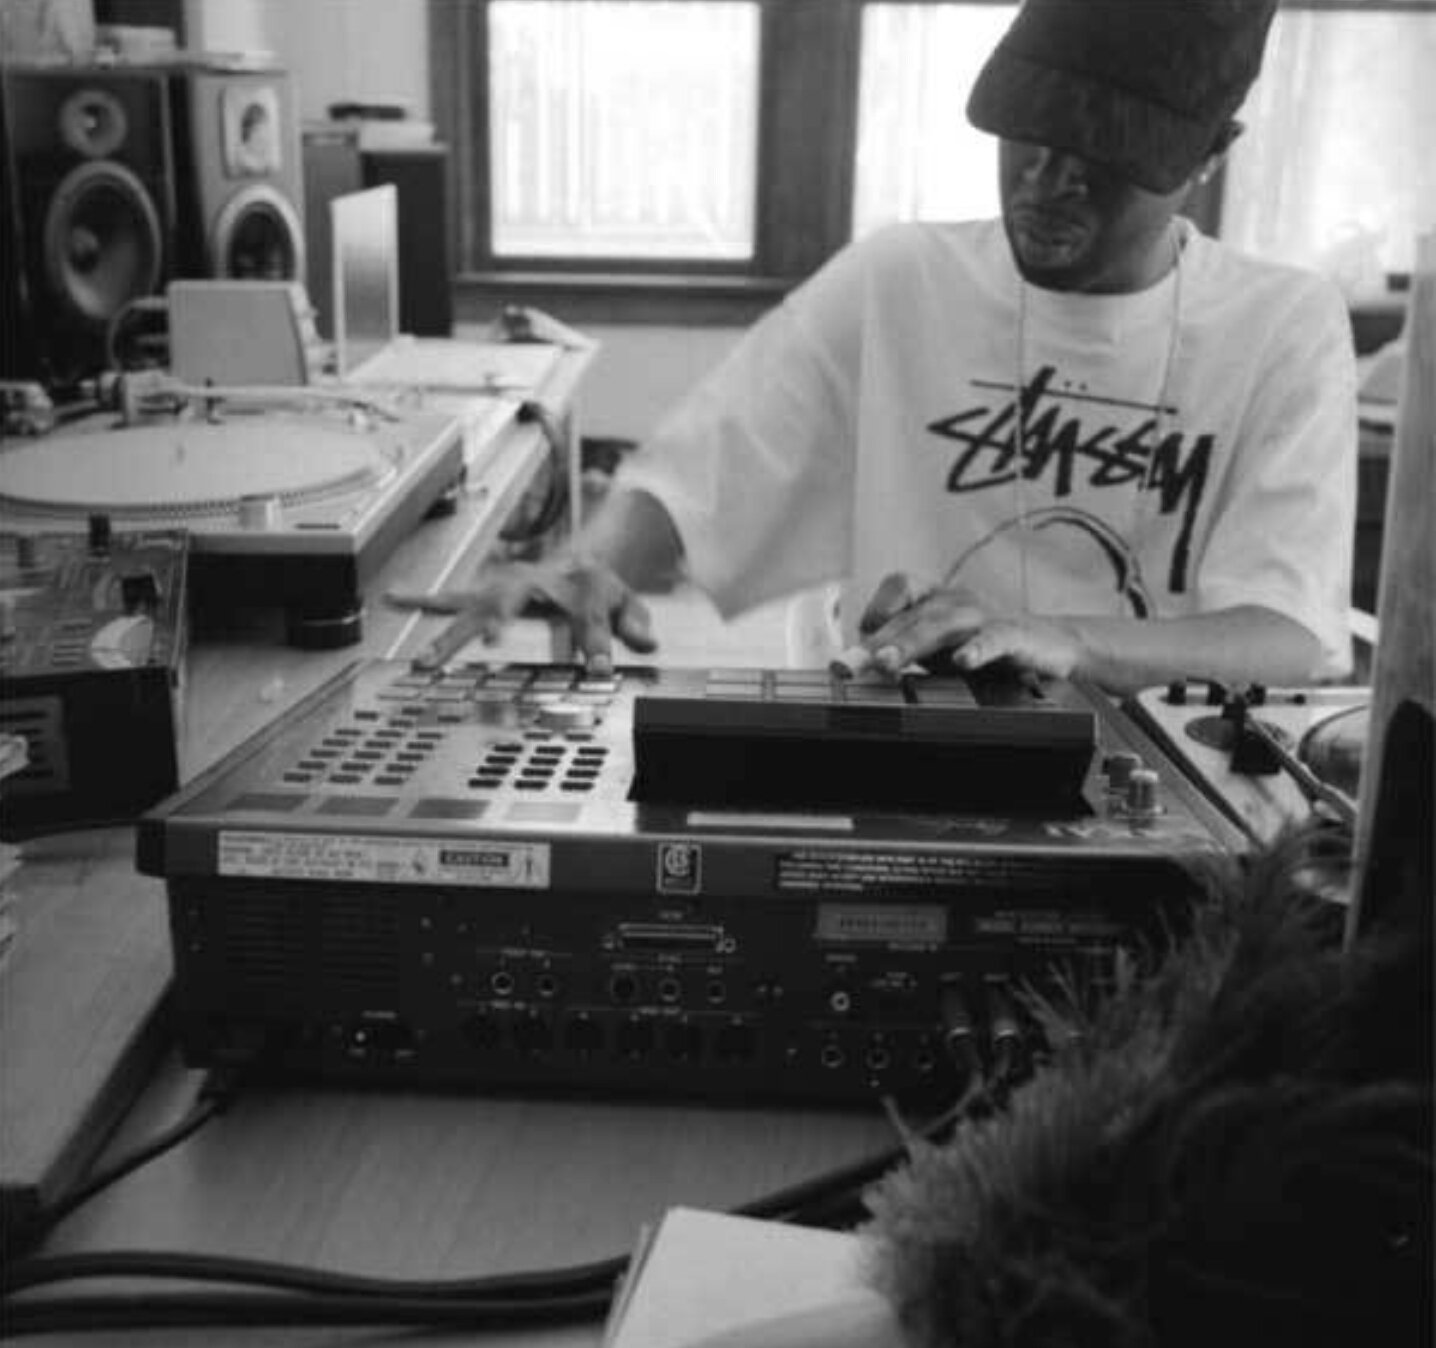 A happy birthday & rip to my inspiration for making beats
J Dilla 